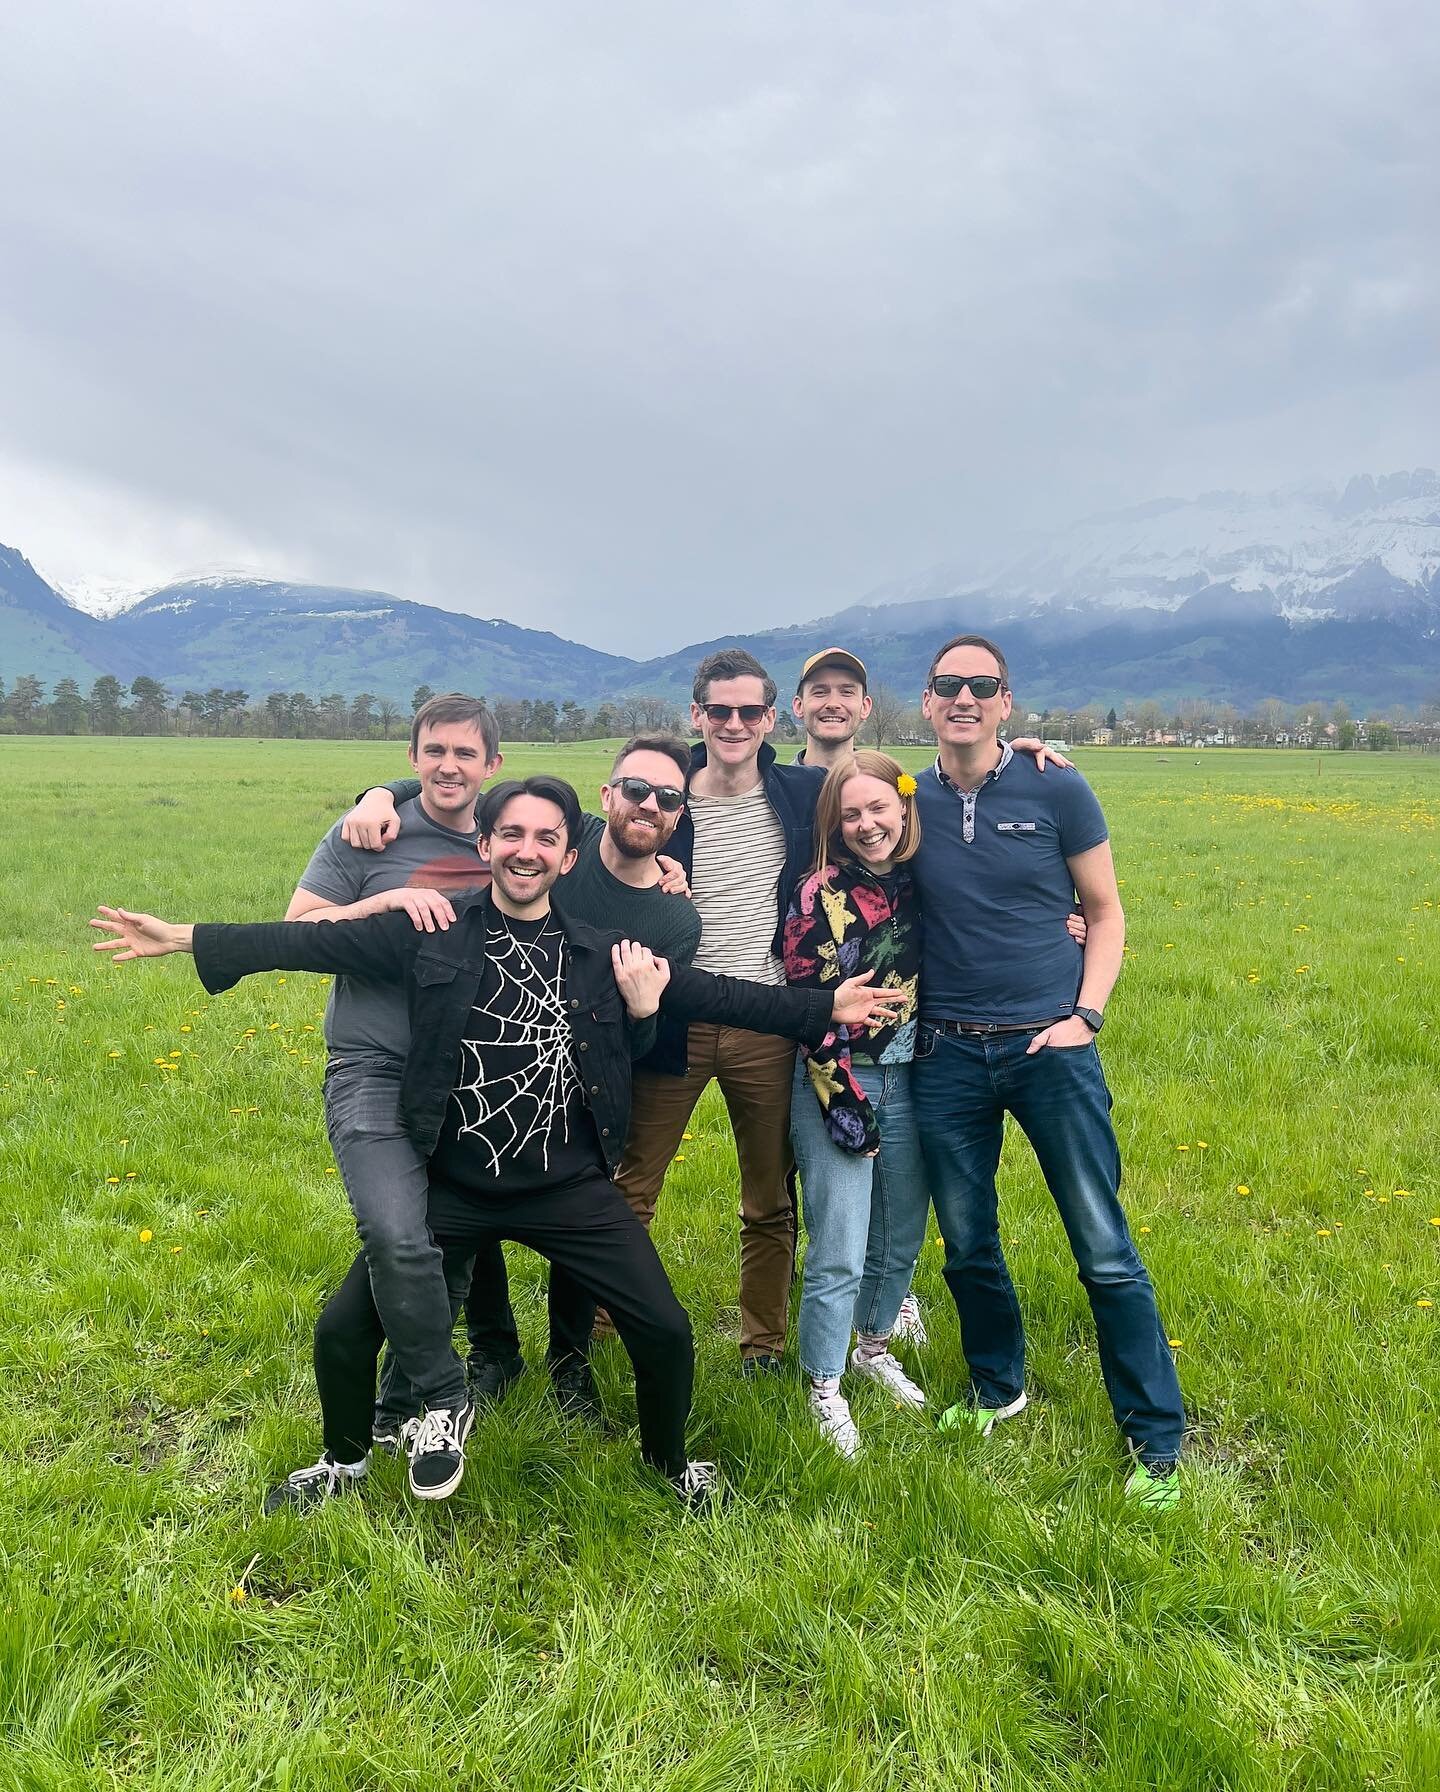 Tour rolls on! And we&rsquo;ve arrived in LIECHTENSTEIN 🇱🇮 To play another sold-out show! What a time we&rsquo;re having. 

Thank you Germany for a beautiful run of gigs. We&rsquo;ll see you again in a few days. 

But tonight! We play The TAK in Sc